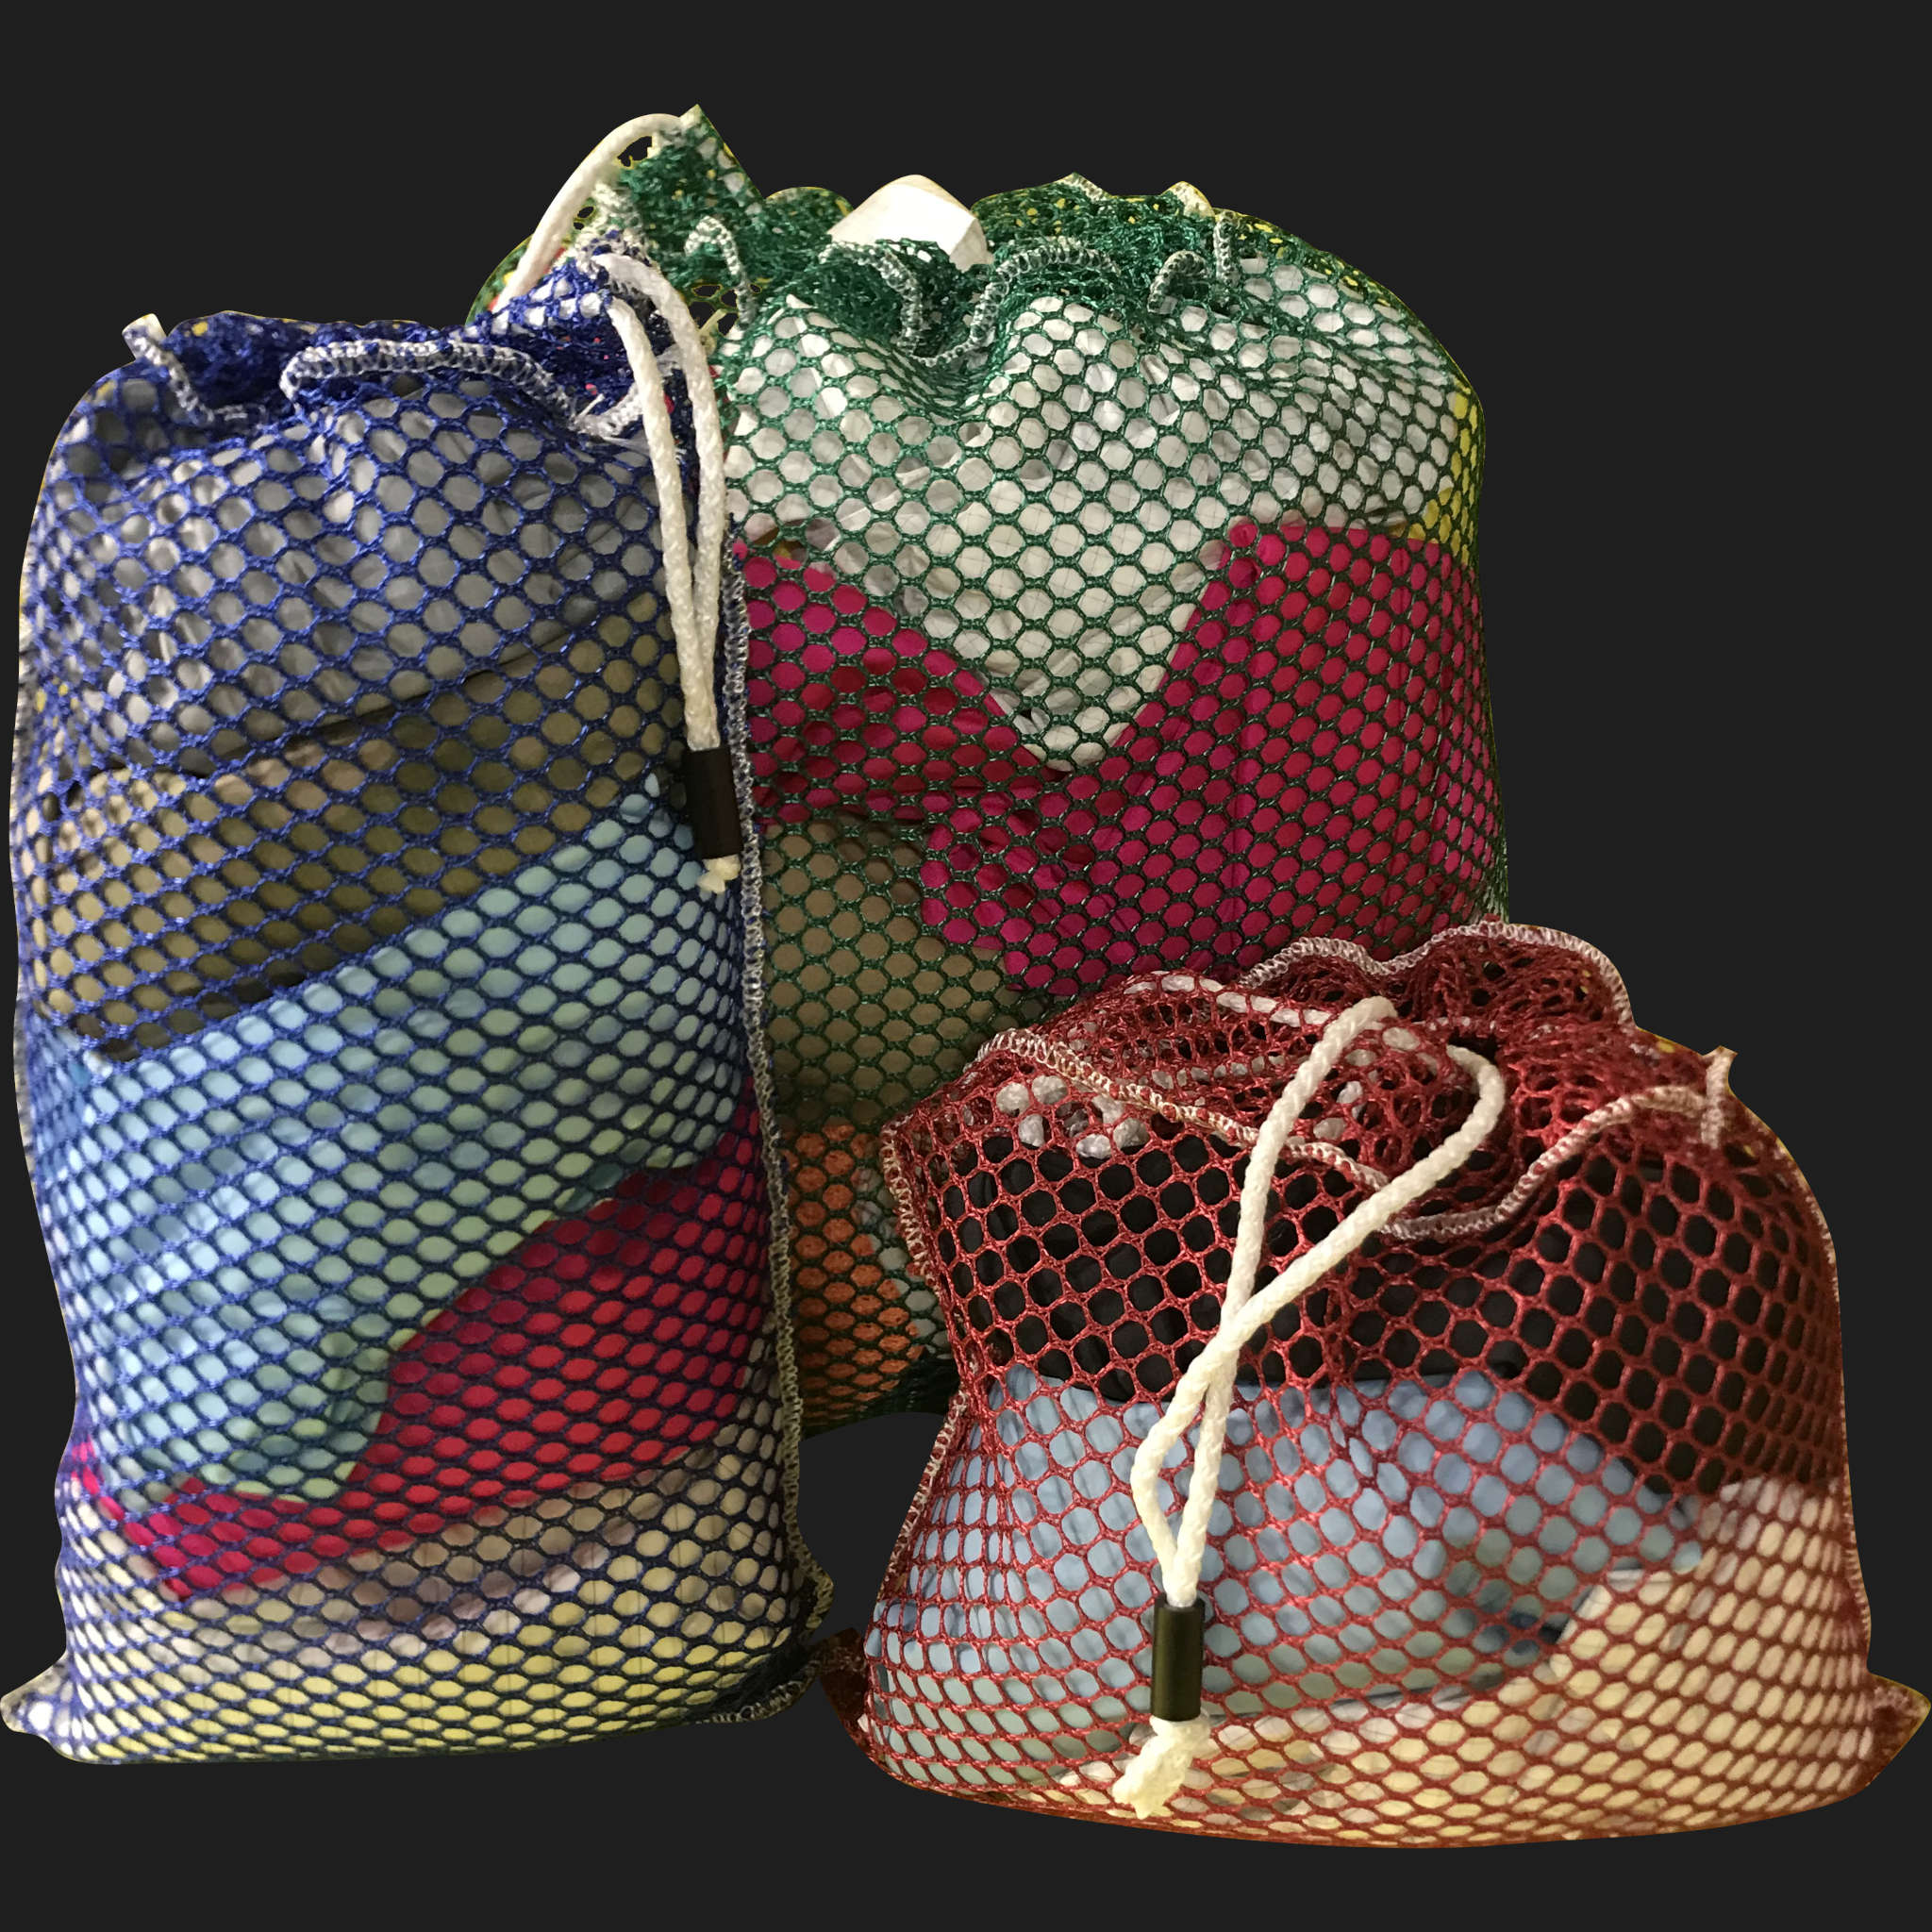 44" x 70" Customized Mesh-Net-Laundry Bags Heavy Duty with Cord and barrellock closure